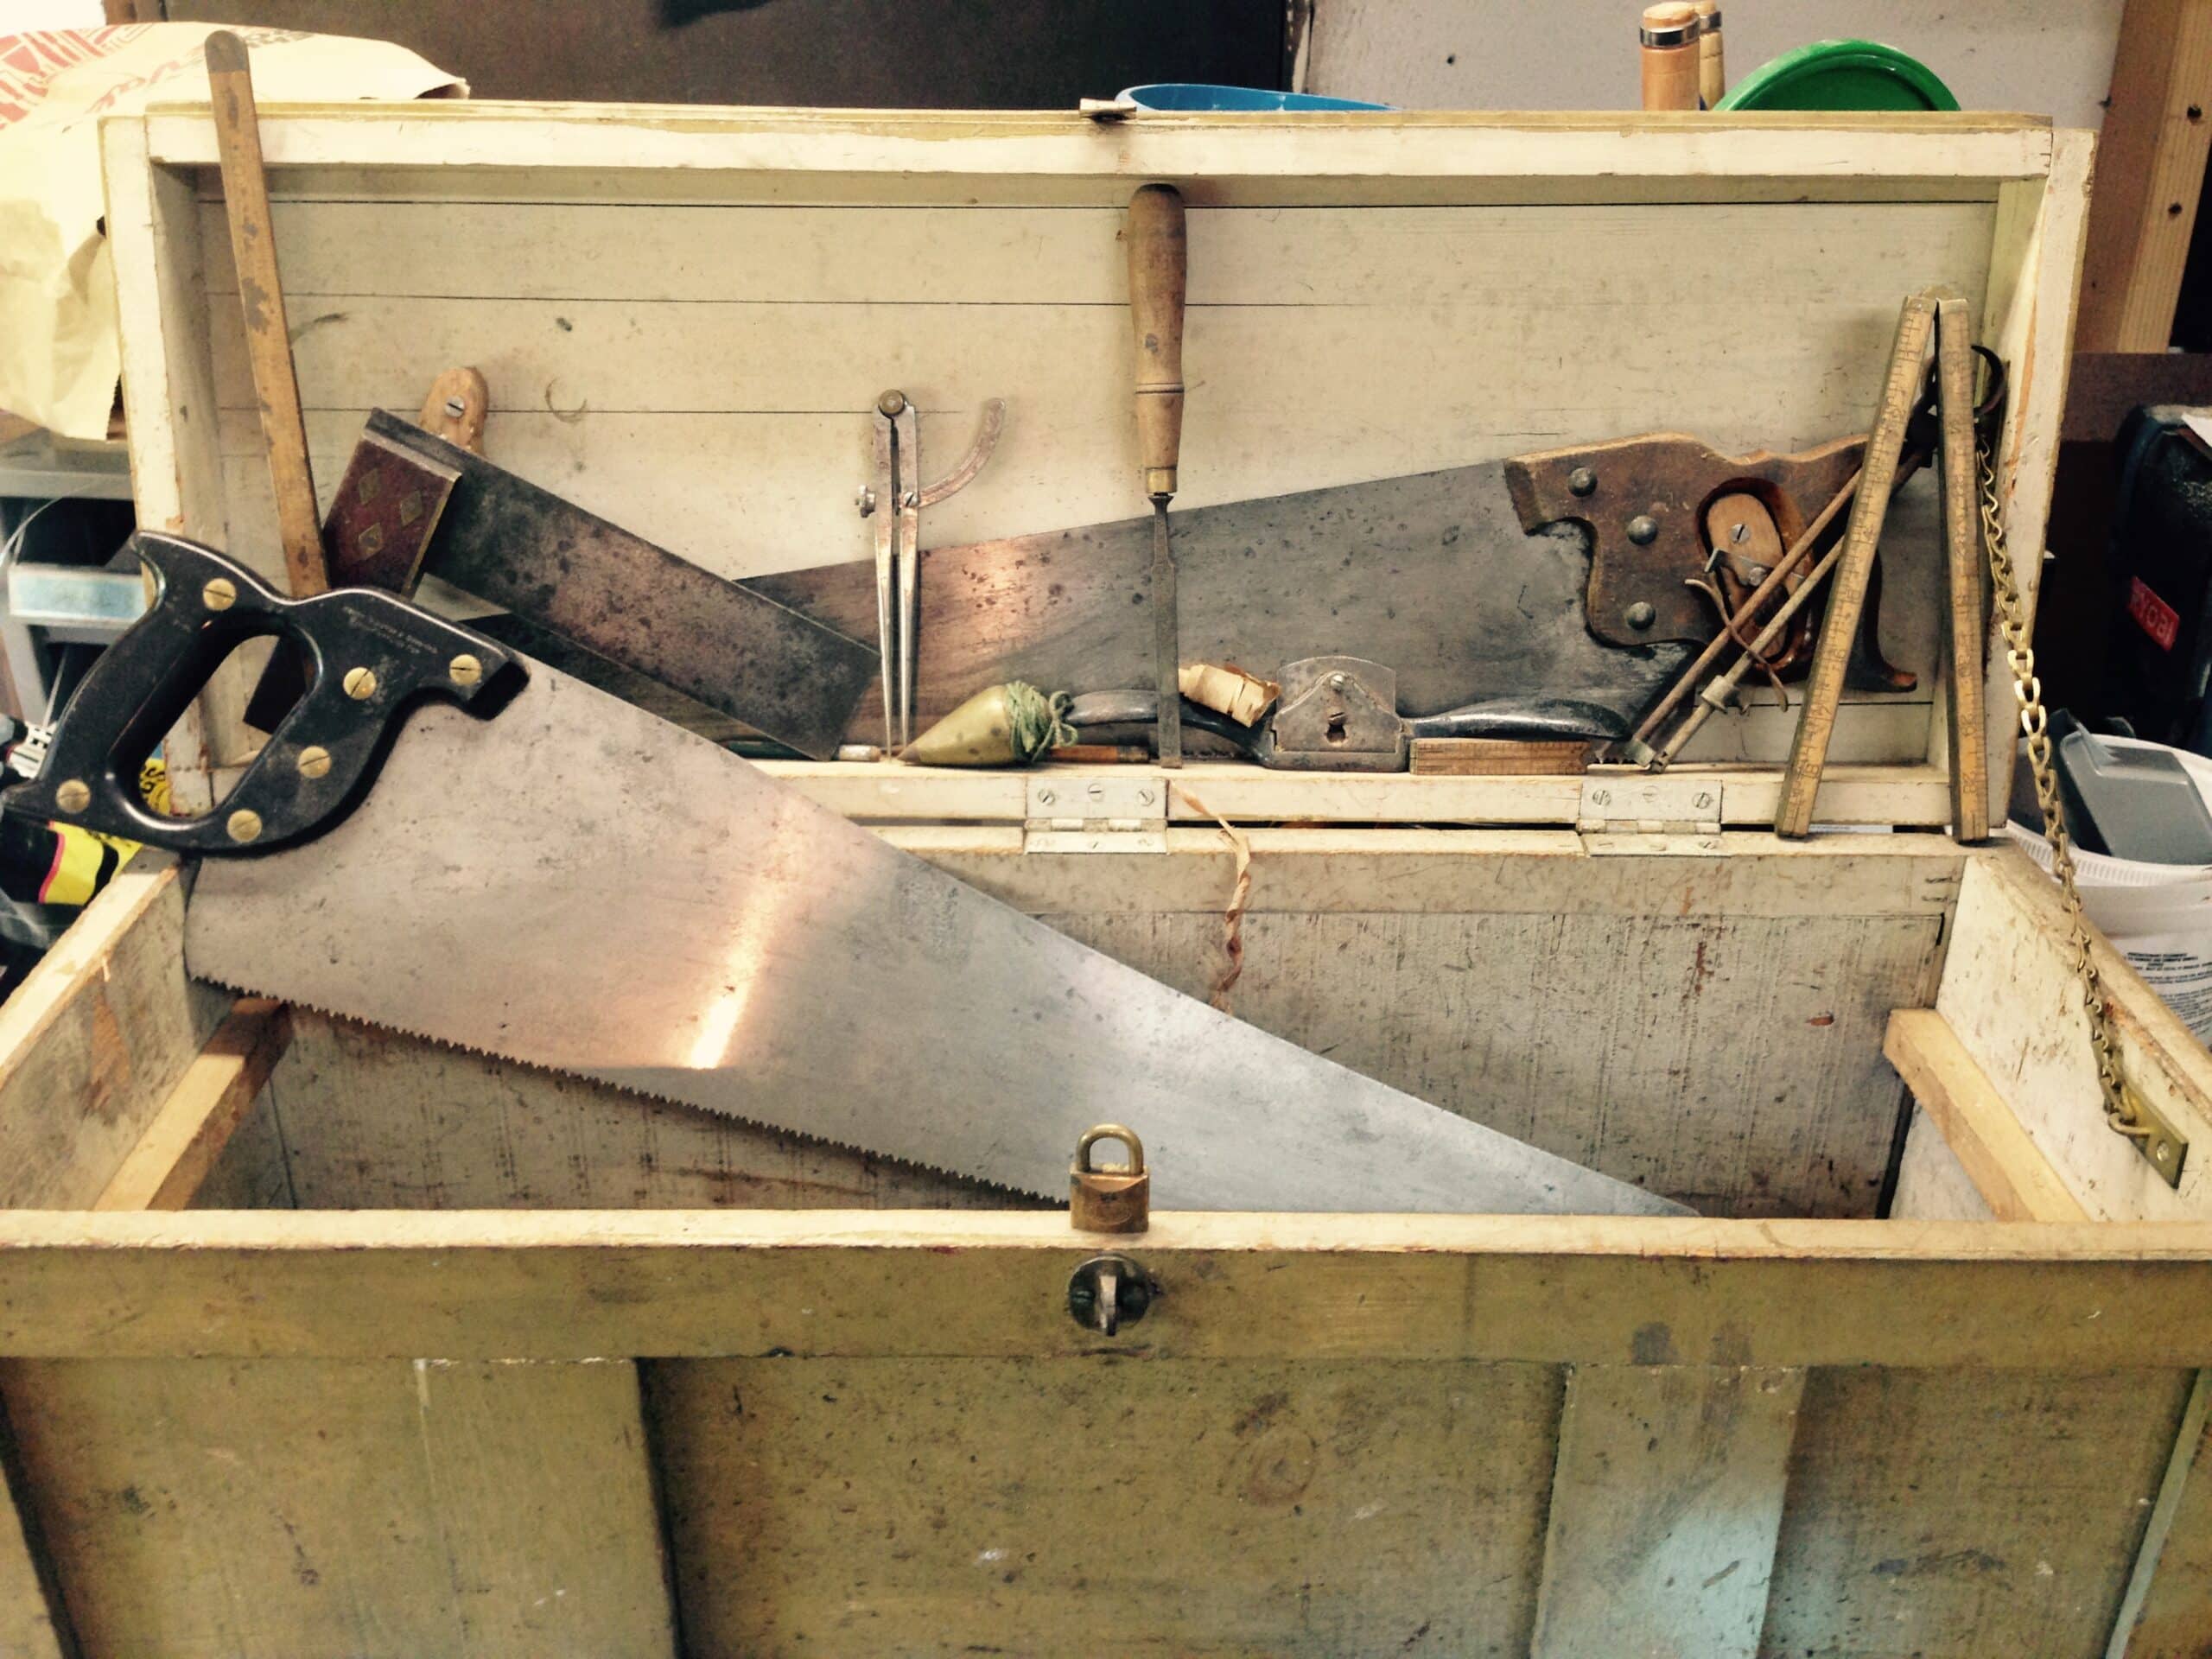 Glimpse of the tool-chest